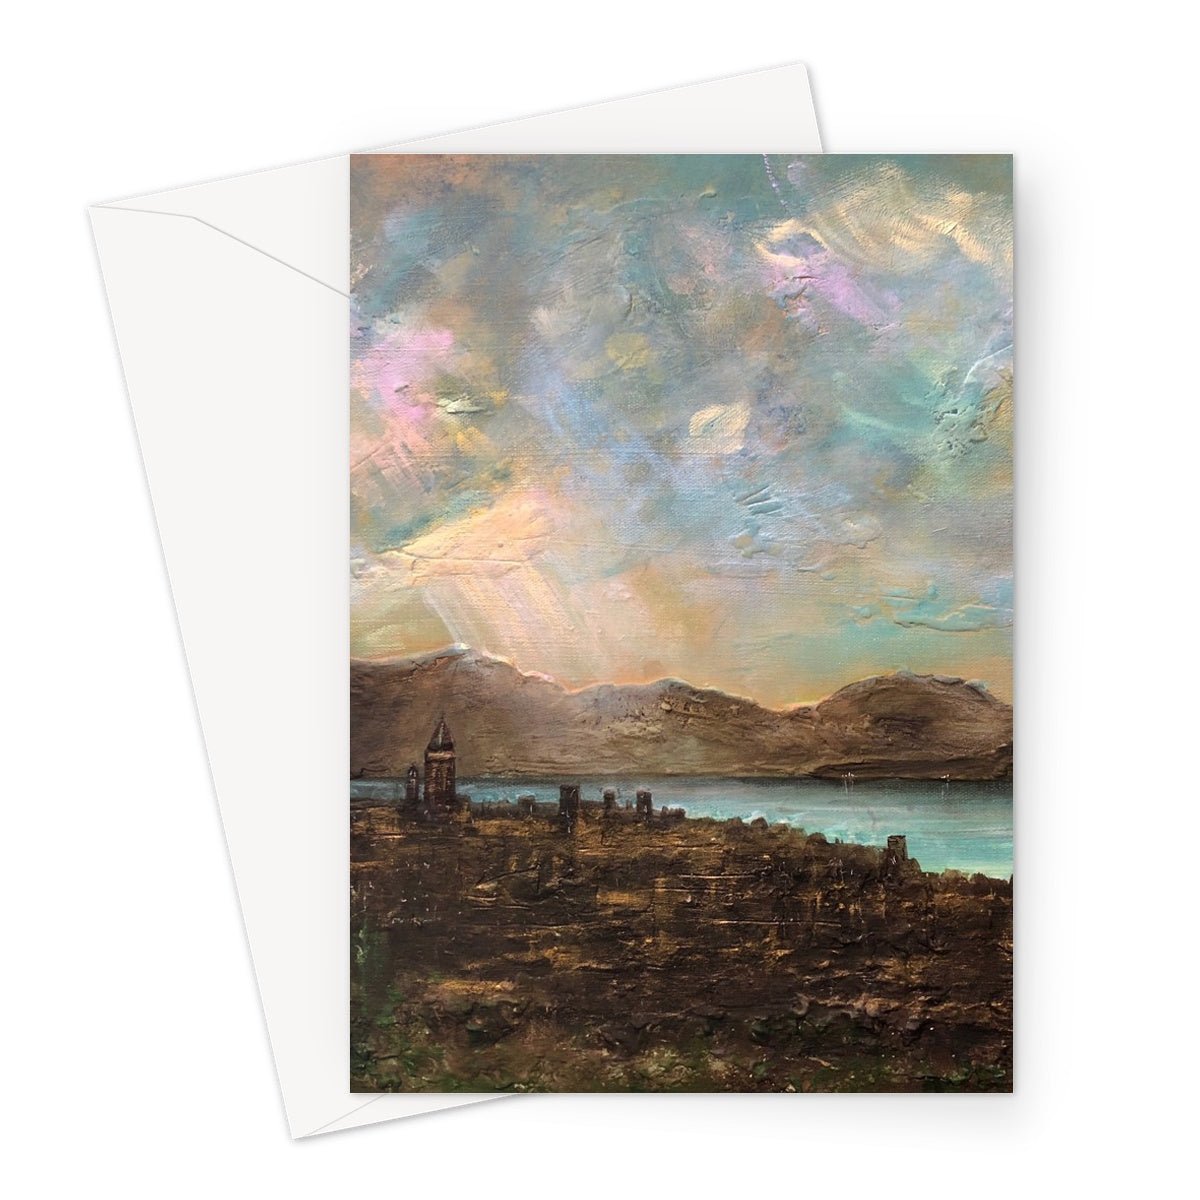 Angels Fingers Over Greenock Art Gifts Greeting Card-Greetings Cards-River Clyde Art Gallery-A5 Portrait-1 Card-Paintings, Prints, Homeware, Art Gifts From Scotland By Scottish Artist Kevin Hunter